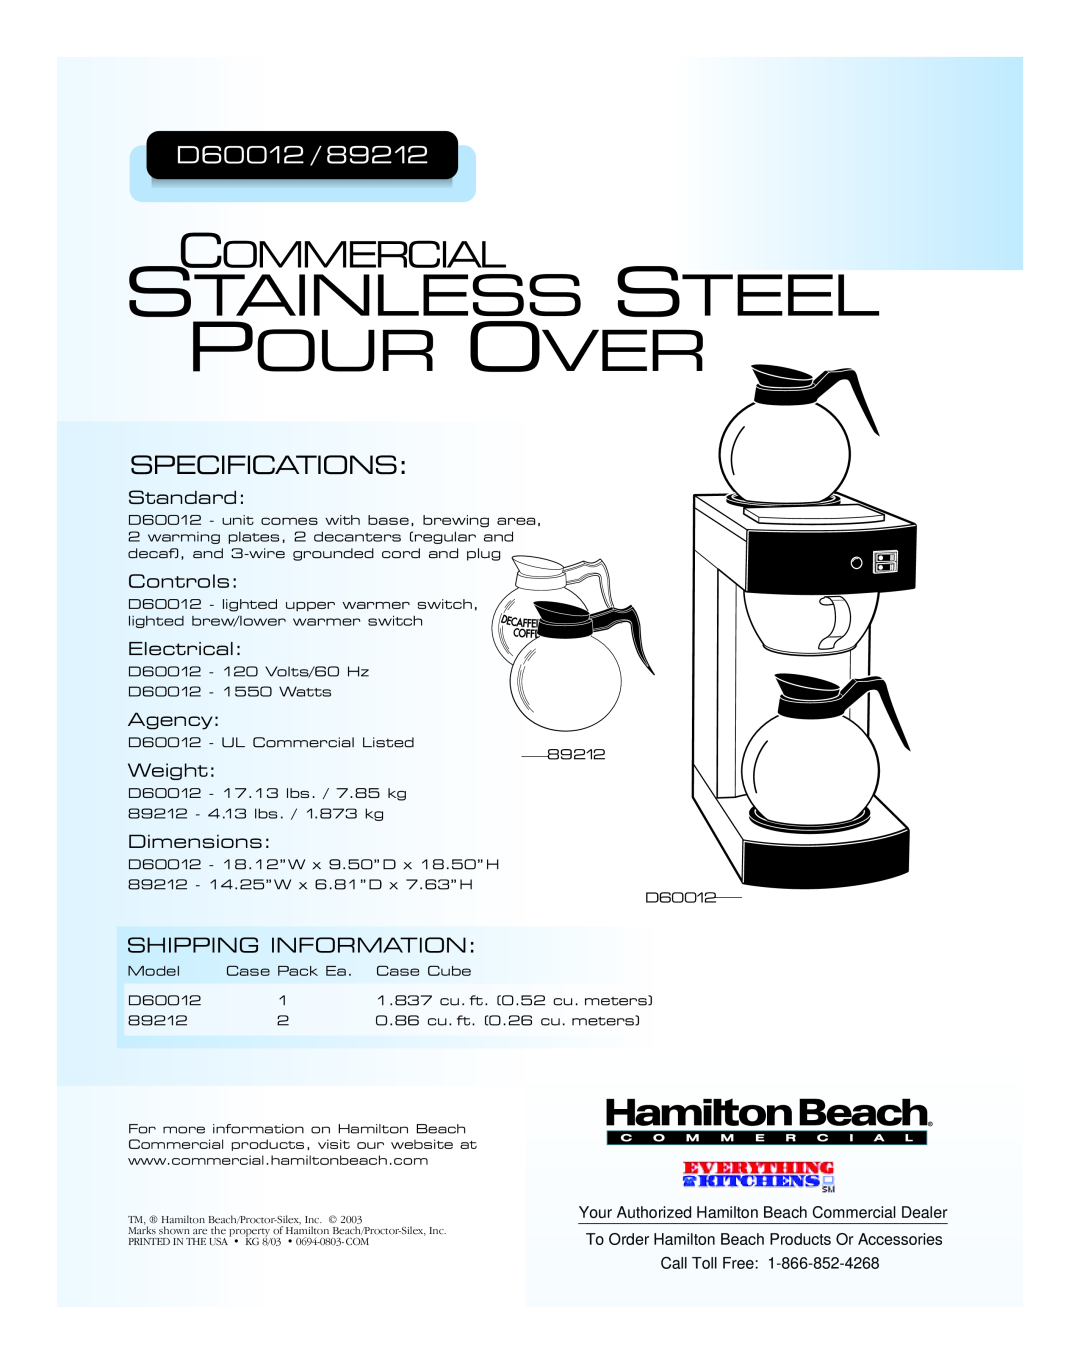 Hamilton Beach D60012 Stainless Steel Pour Over, Commercial, Specifications, Shipping Information, Standard, Controls 